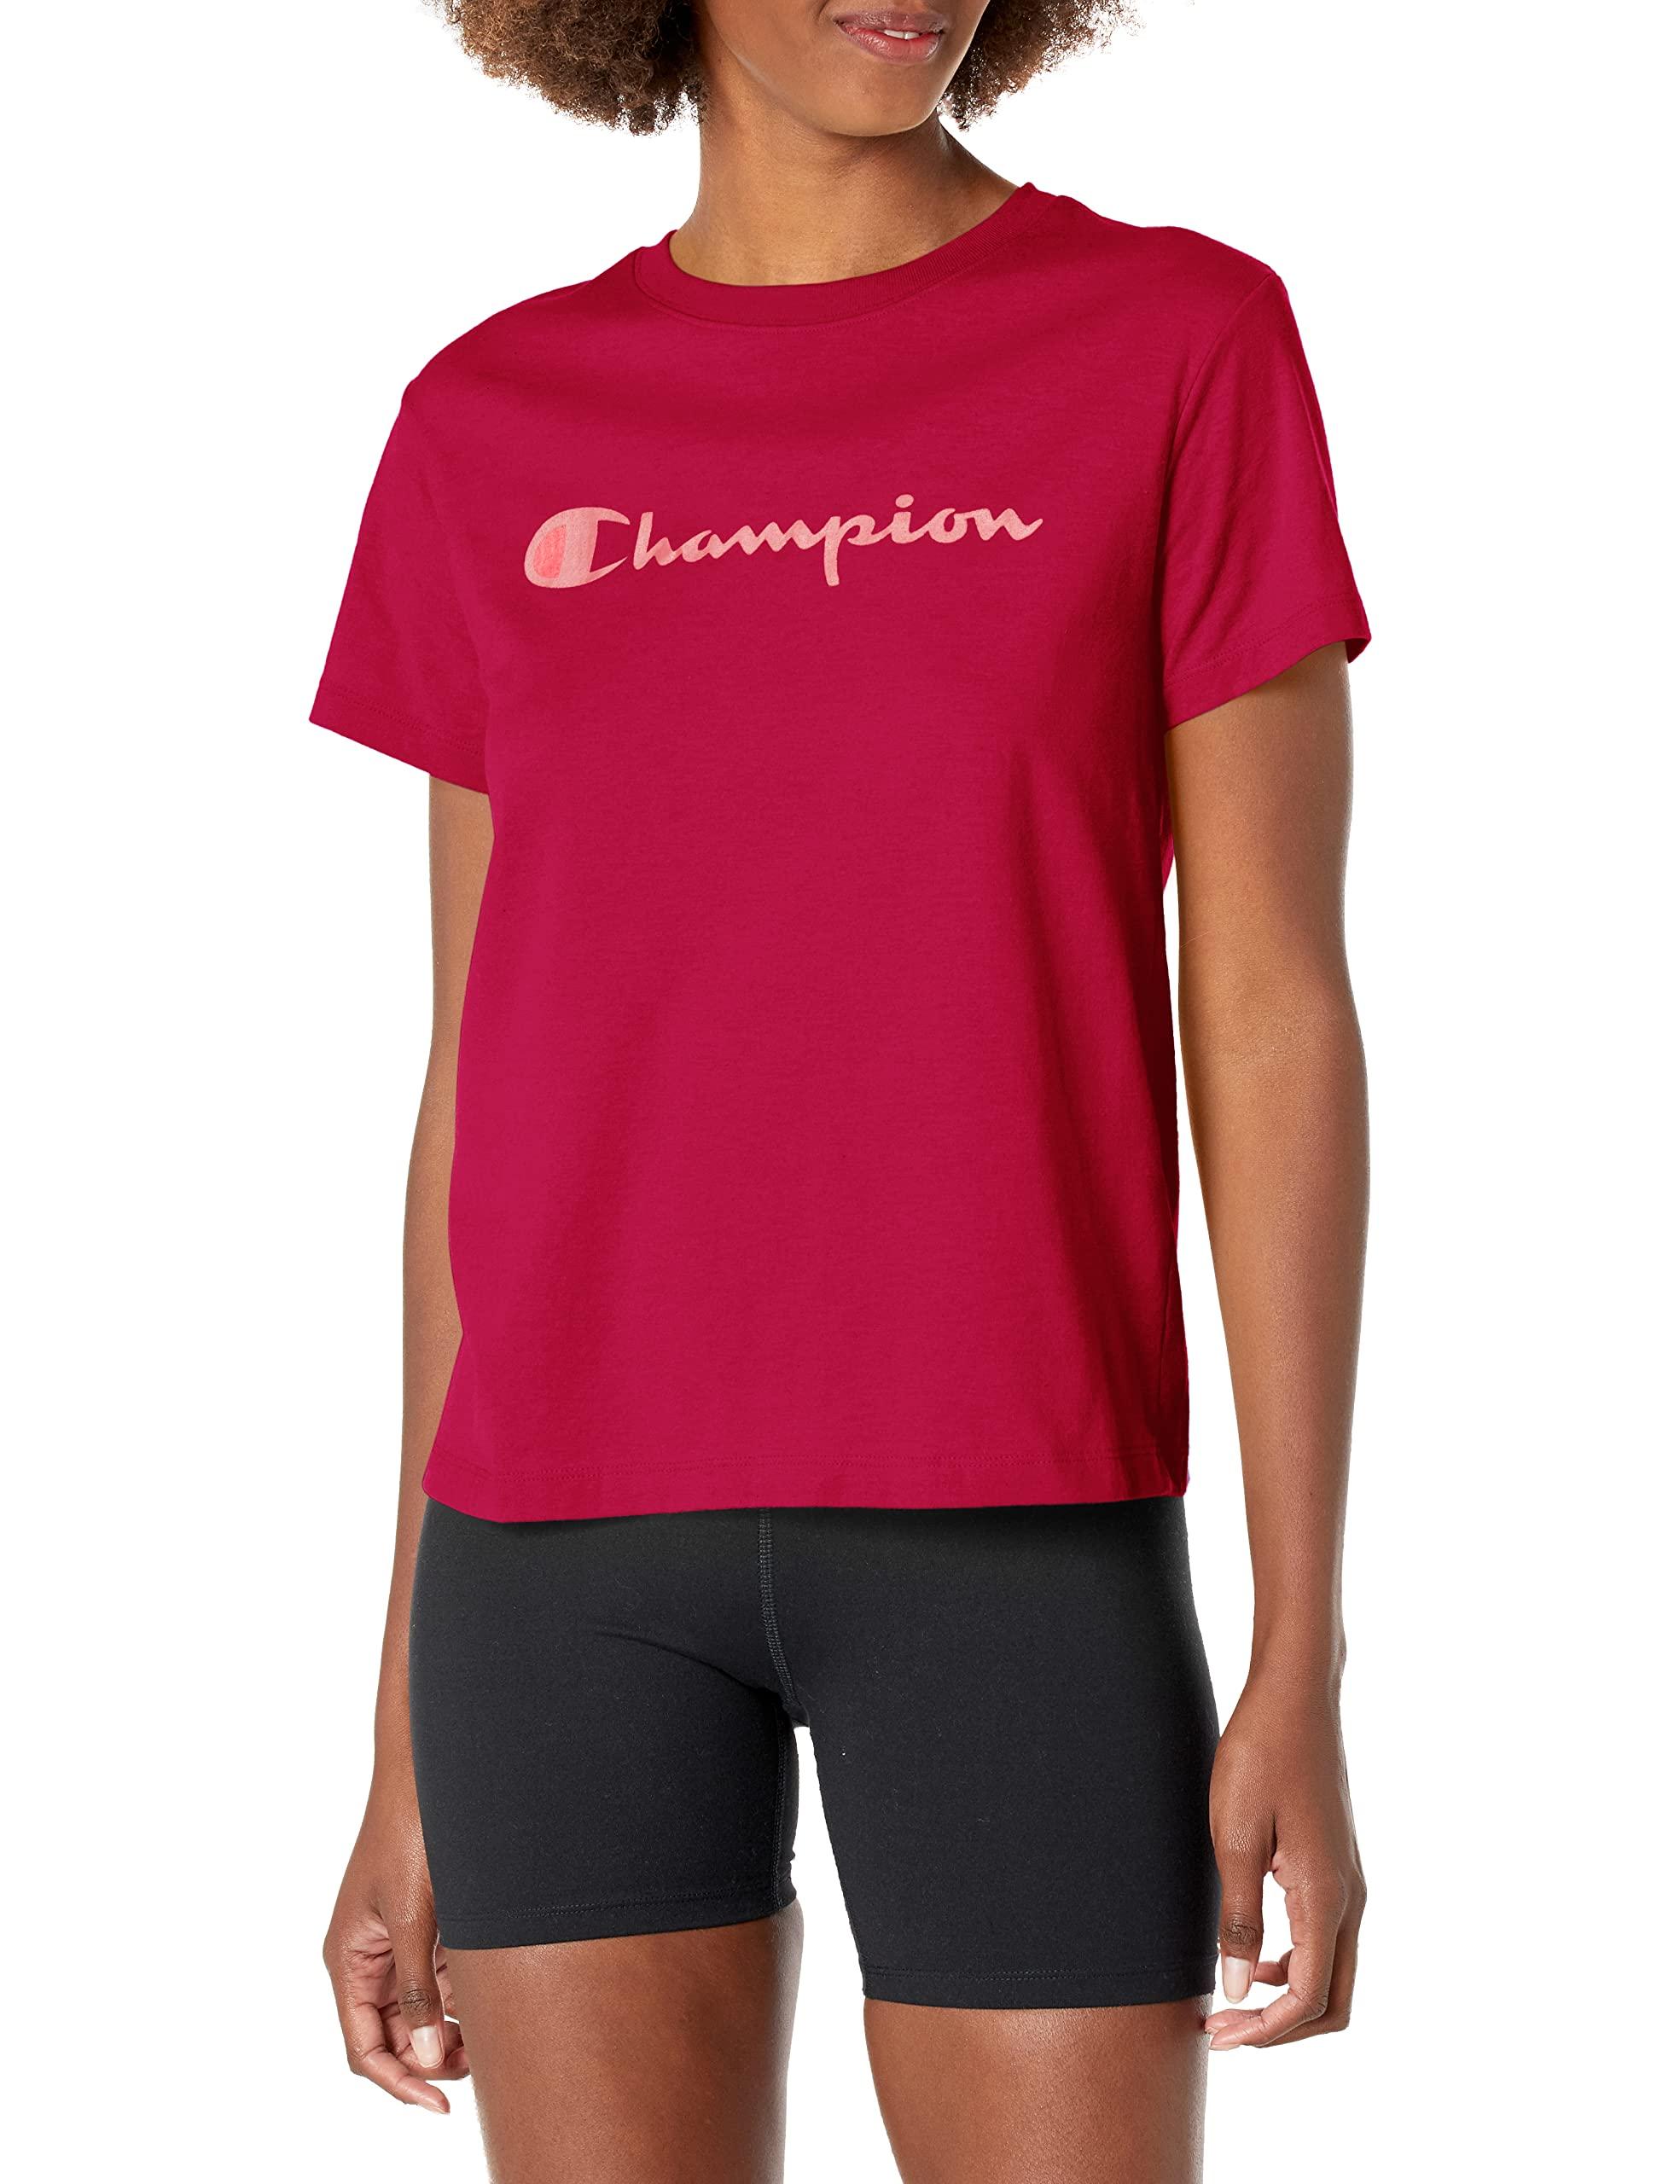 Champion Classic Tee in Red Lyst